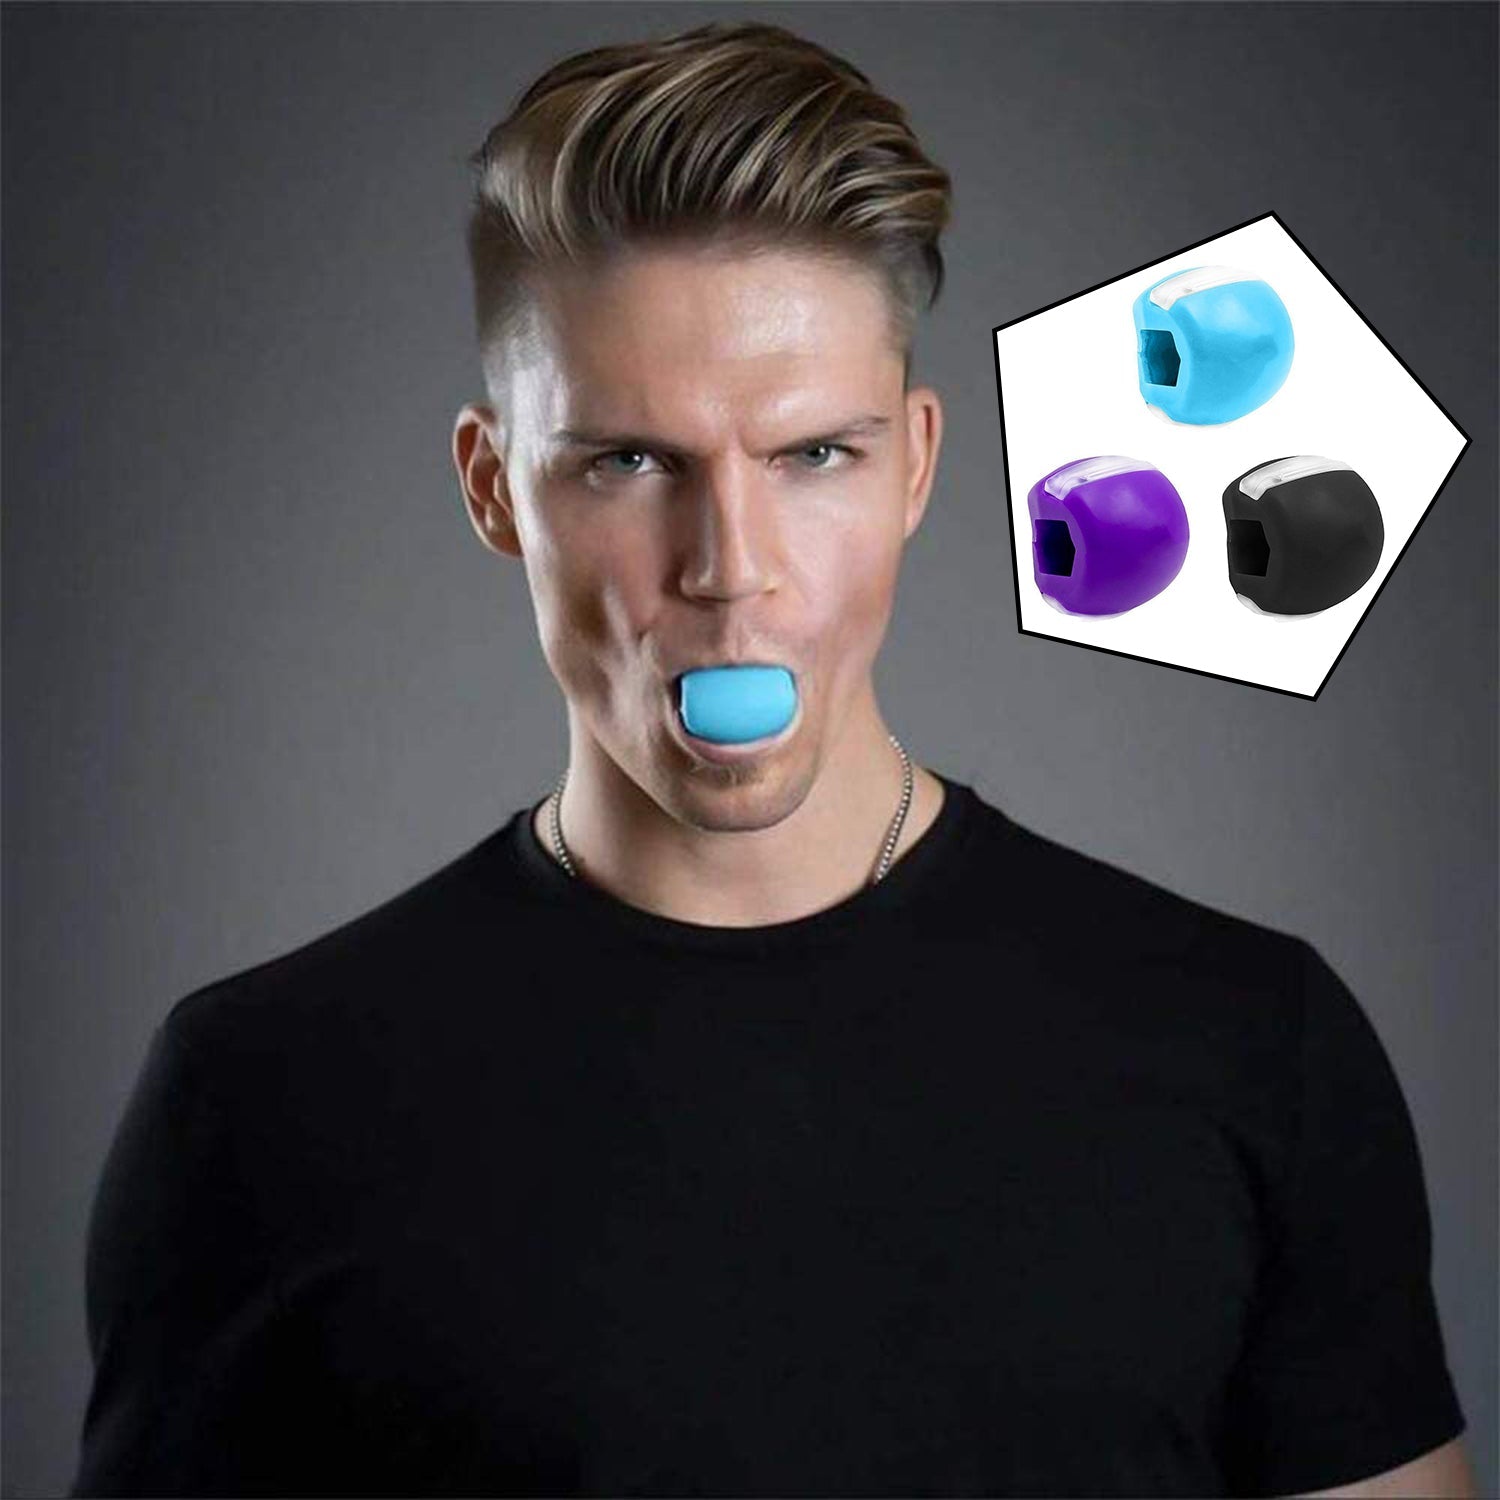 6101 Jawline Exerciser To Define Your Jawline (1Pc Only)